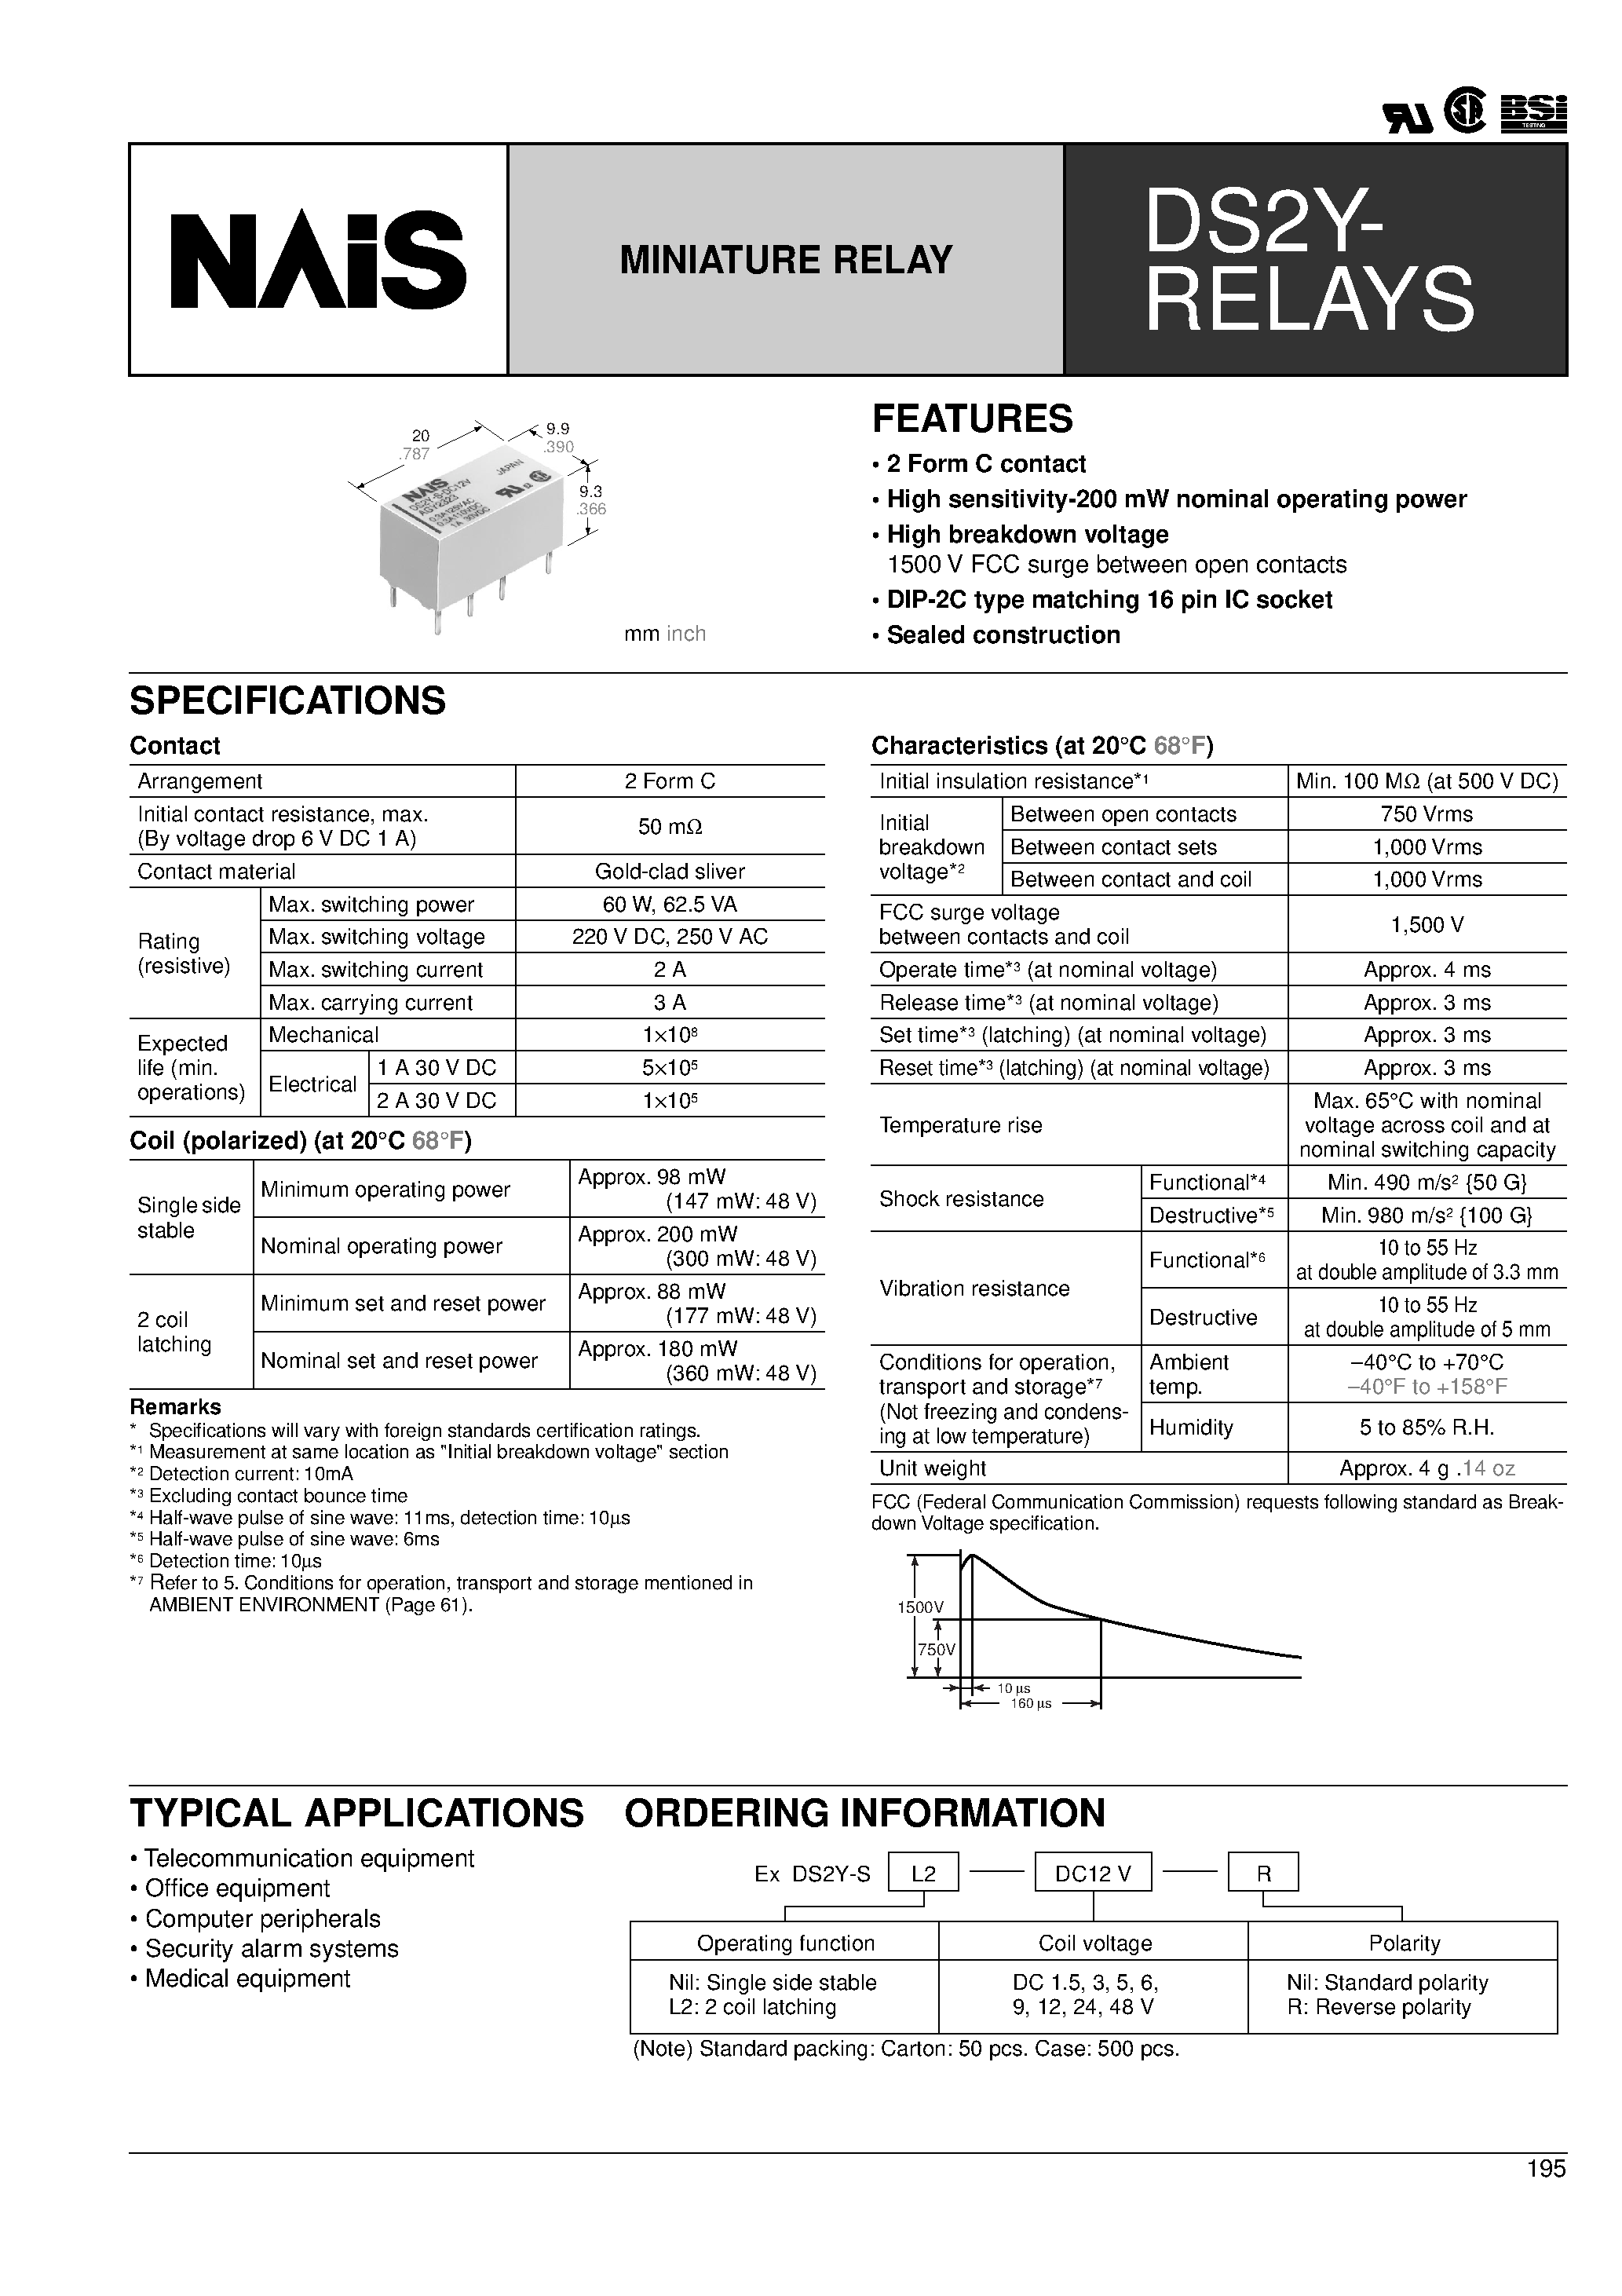 Datasheet DS2Y-SL2-DC1.5V - 2 Form C contact High sensitivity-200 mW nominal operating power page 1